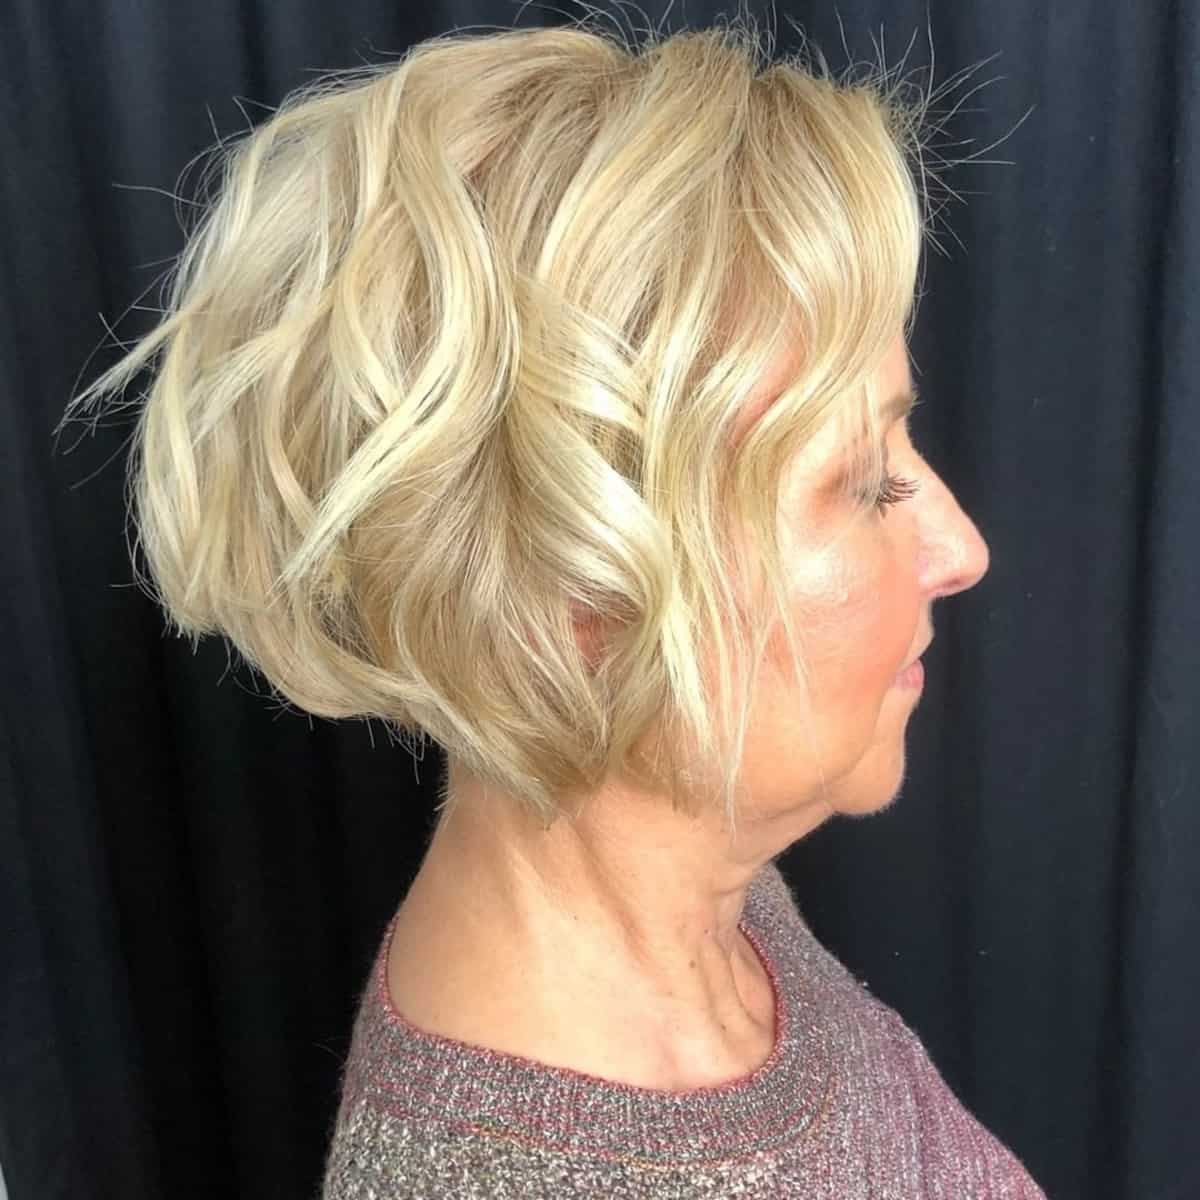 Short Shag with Beach Waves for Older Women Over 60